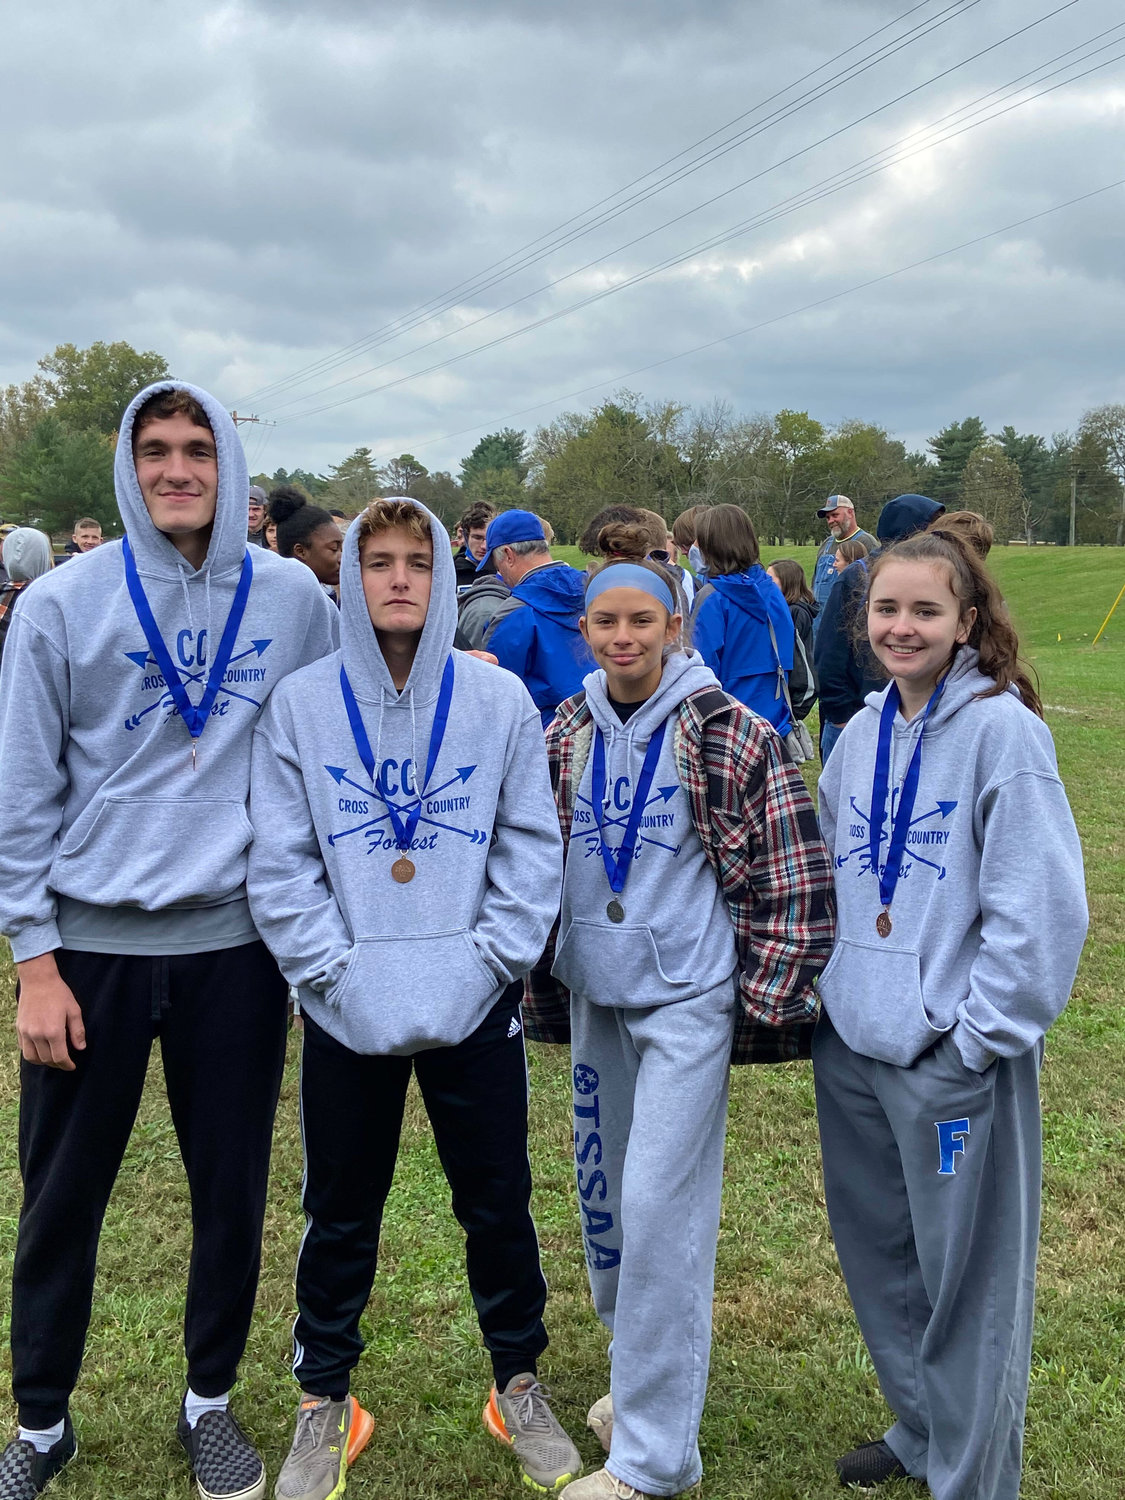 Forrest’s Top 10 region medalists from left are CJ Sanchez (4th), Tyler Baxter (8th), Jaedyn Stalnecker (2nd), and Justina Mosley (7th).